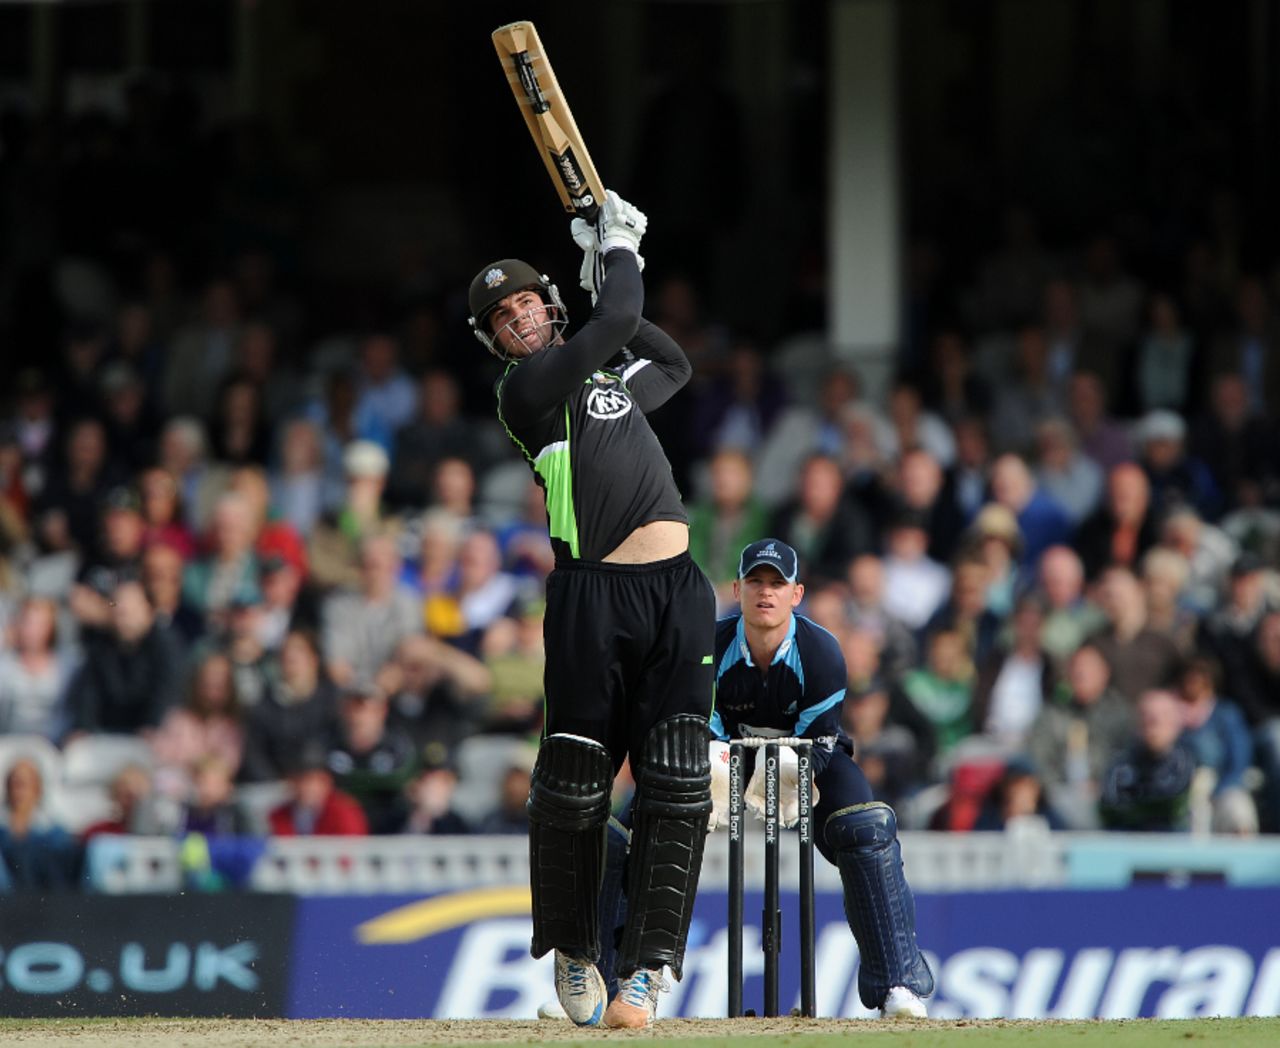 Tom Maynard hits one of four sixes in his half-century against Sussex, Surrey v Sussex, Clydesdale Bank 40 Semi-Final, The Oval, September 4 2011